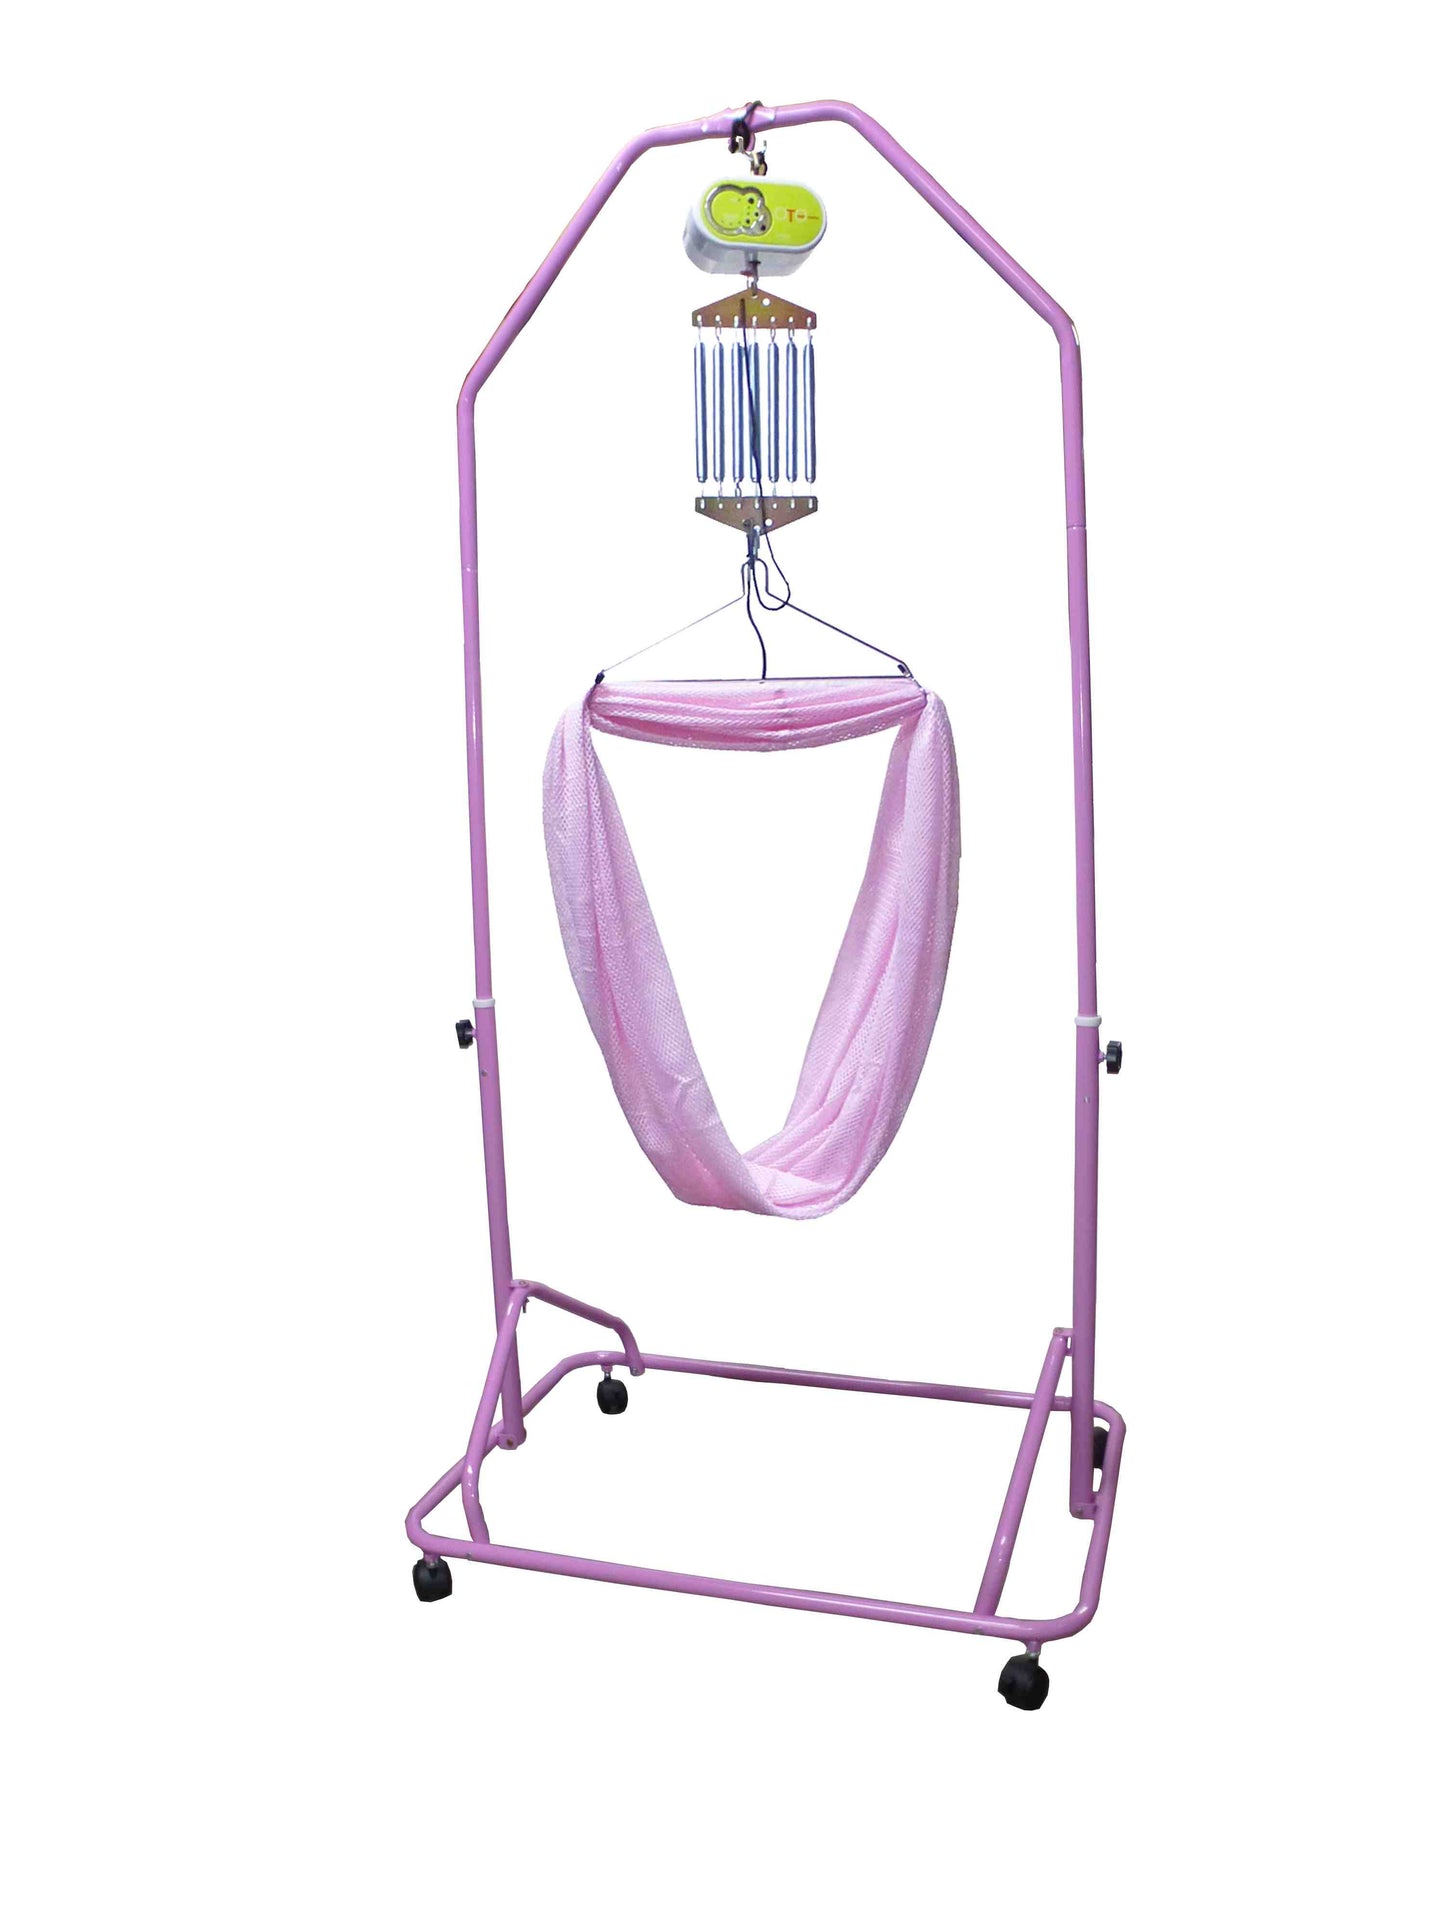 Spring Cot with Music & Remote Control Electrical Cradle